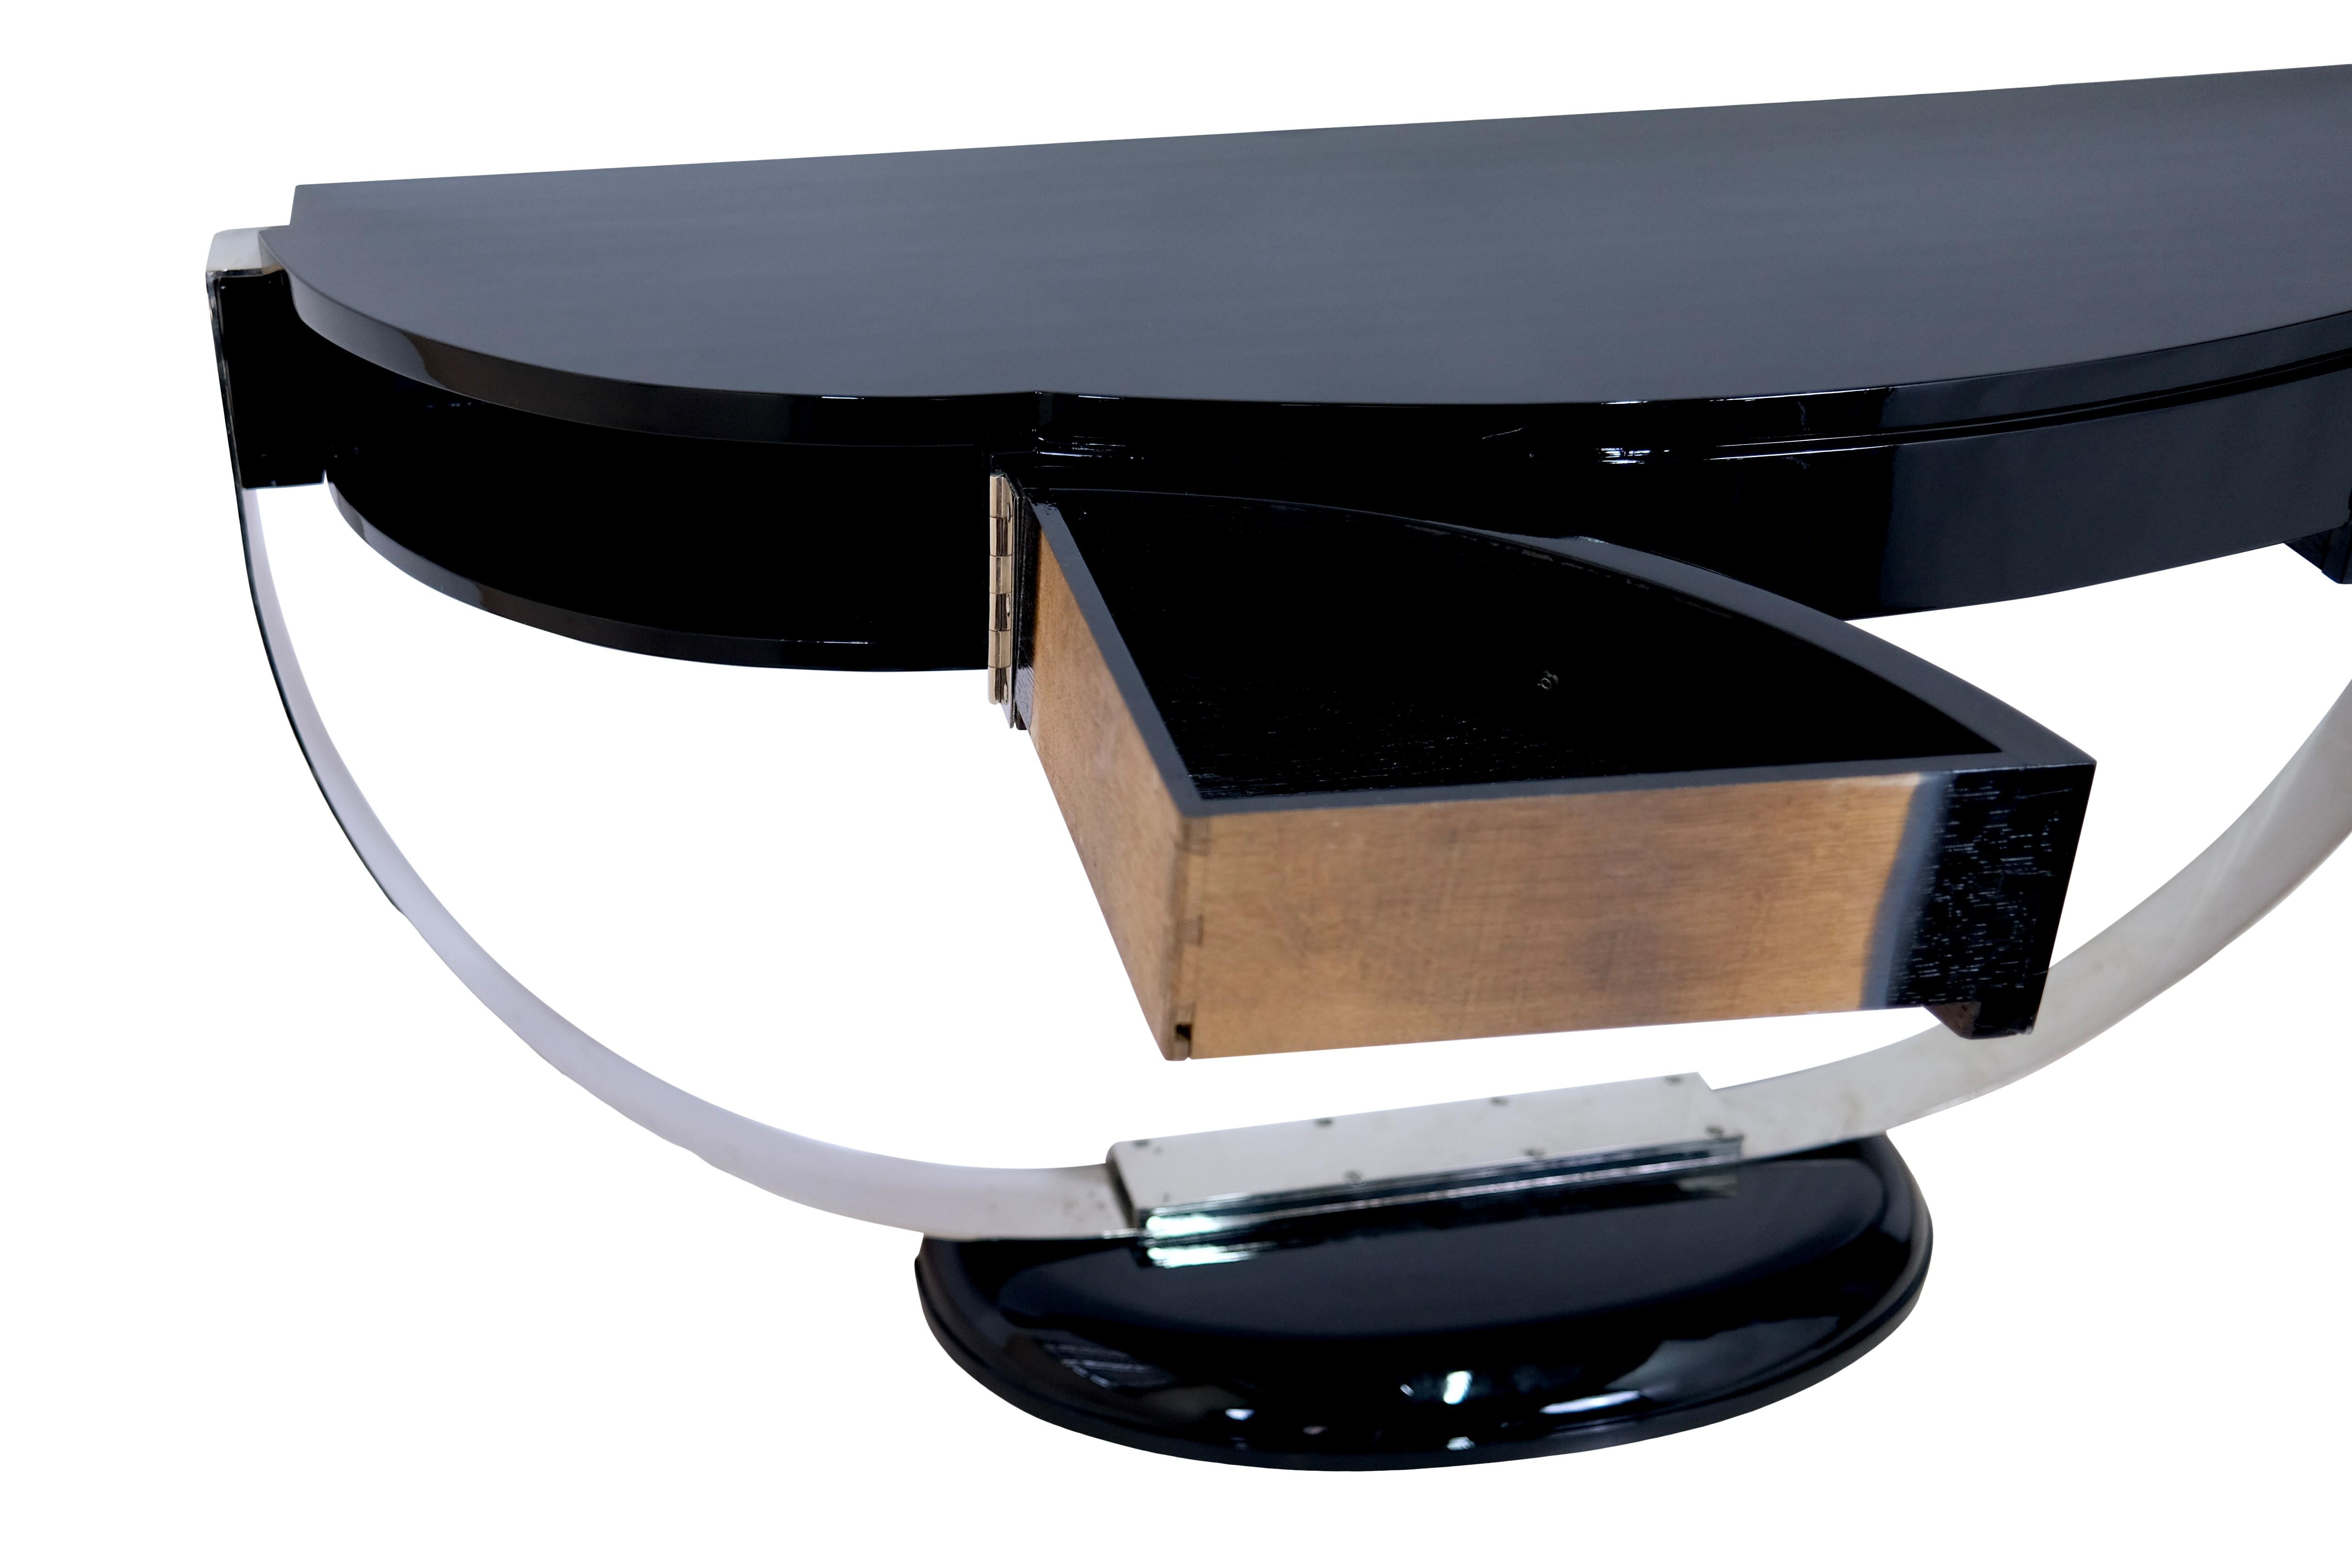 Polished French 1930s Art Deco Console Table in Black Lacquer and Chromed Metal Brace For Sale